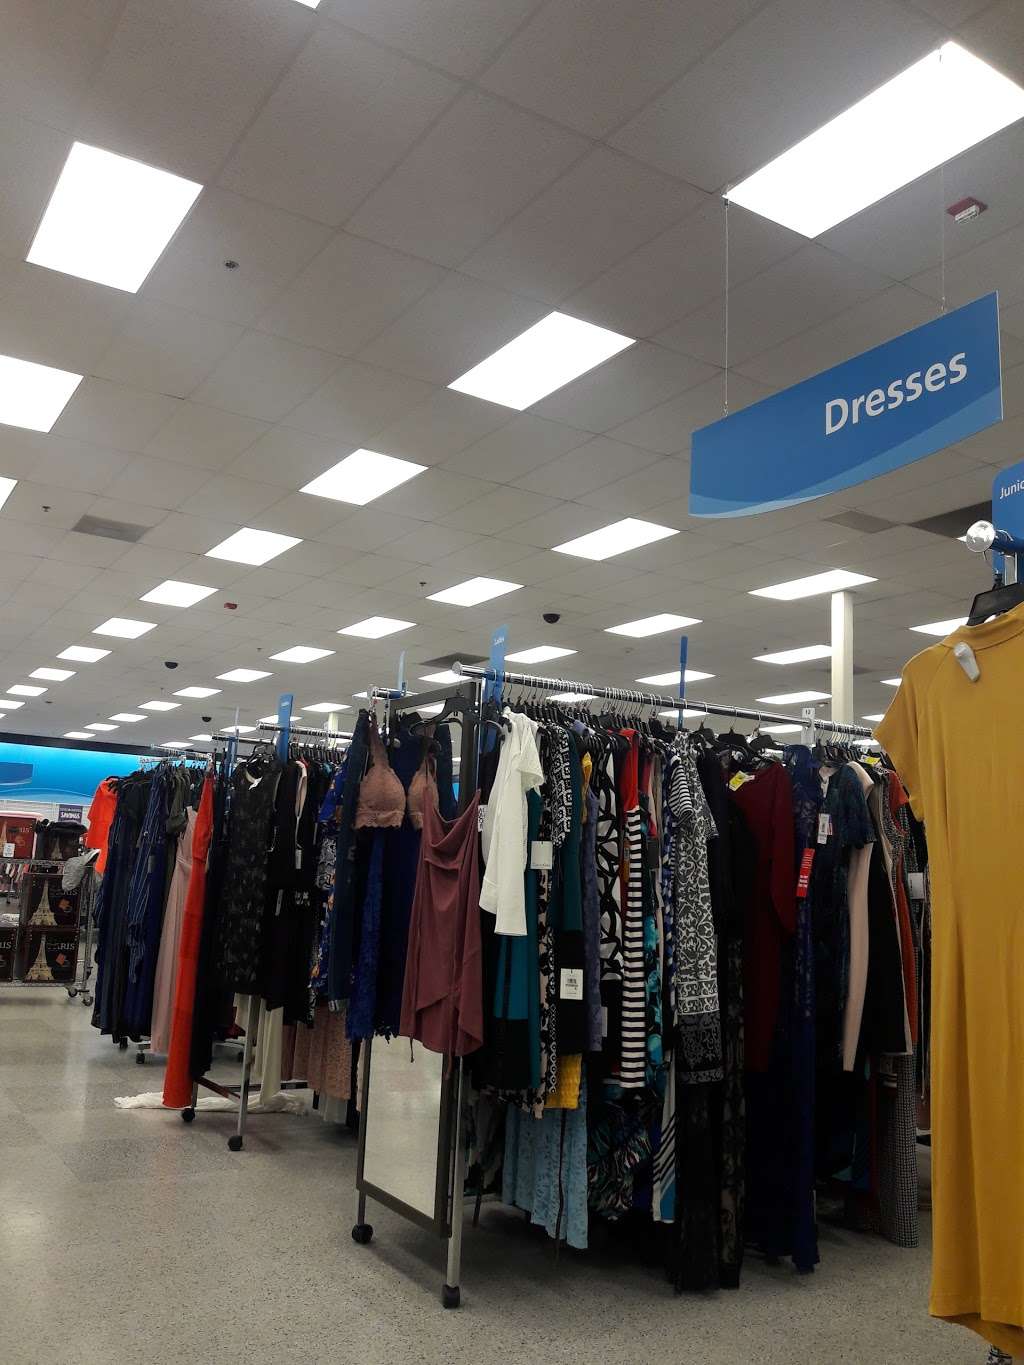 Ross Dress for Less | 20352 US Highway 18, Apple Valley, CA 92307, USA | Phone: (760) 961-2183